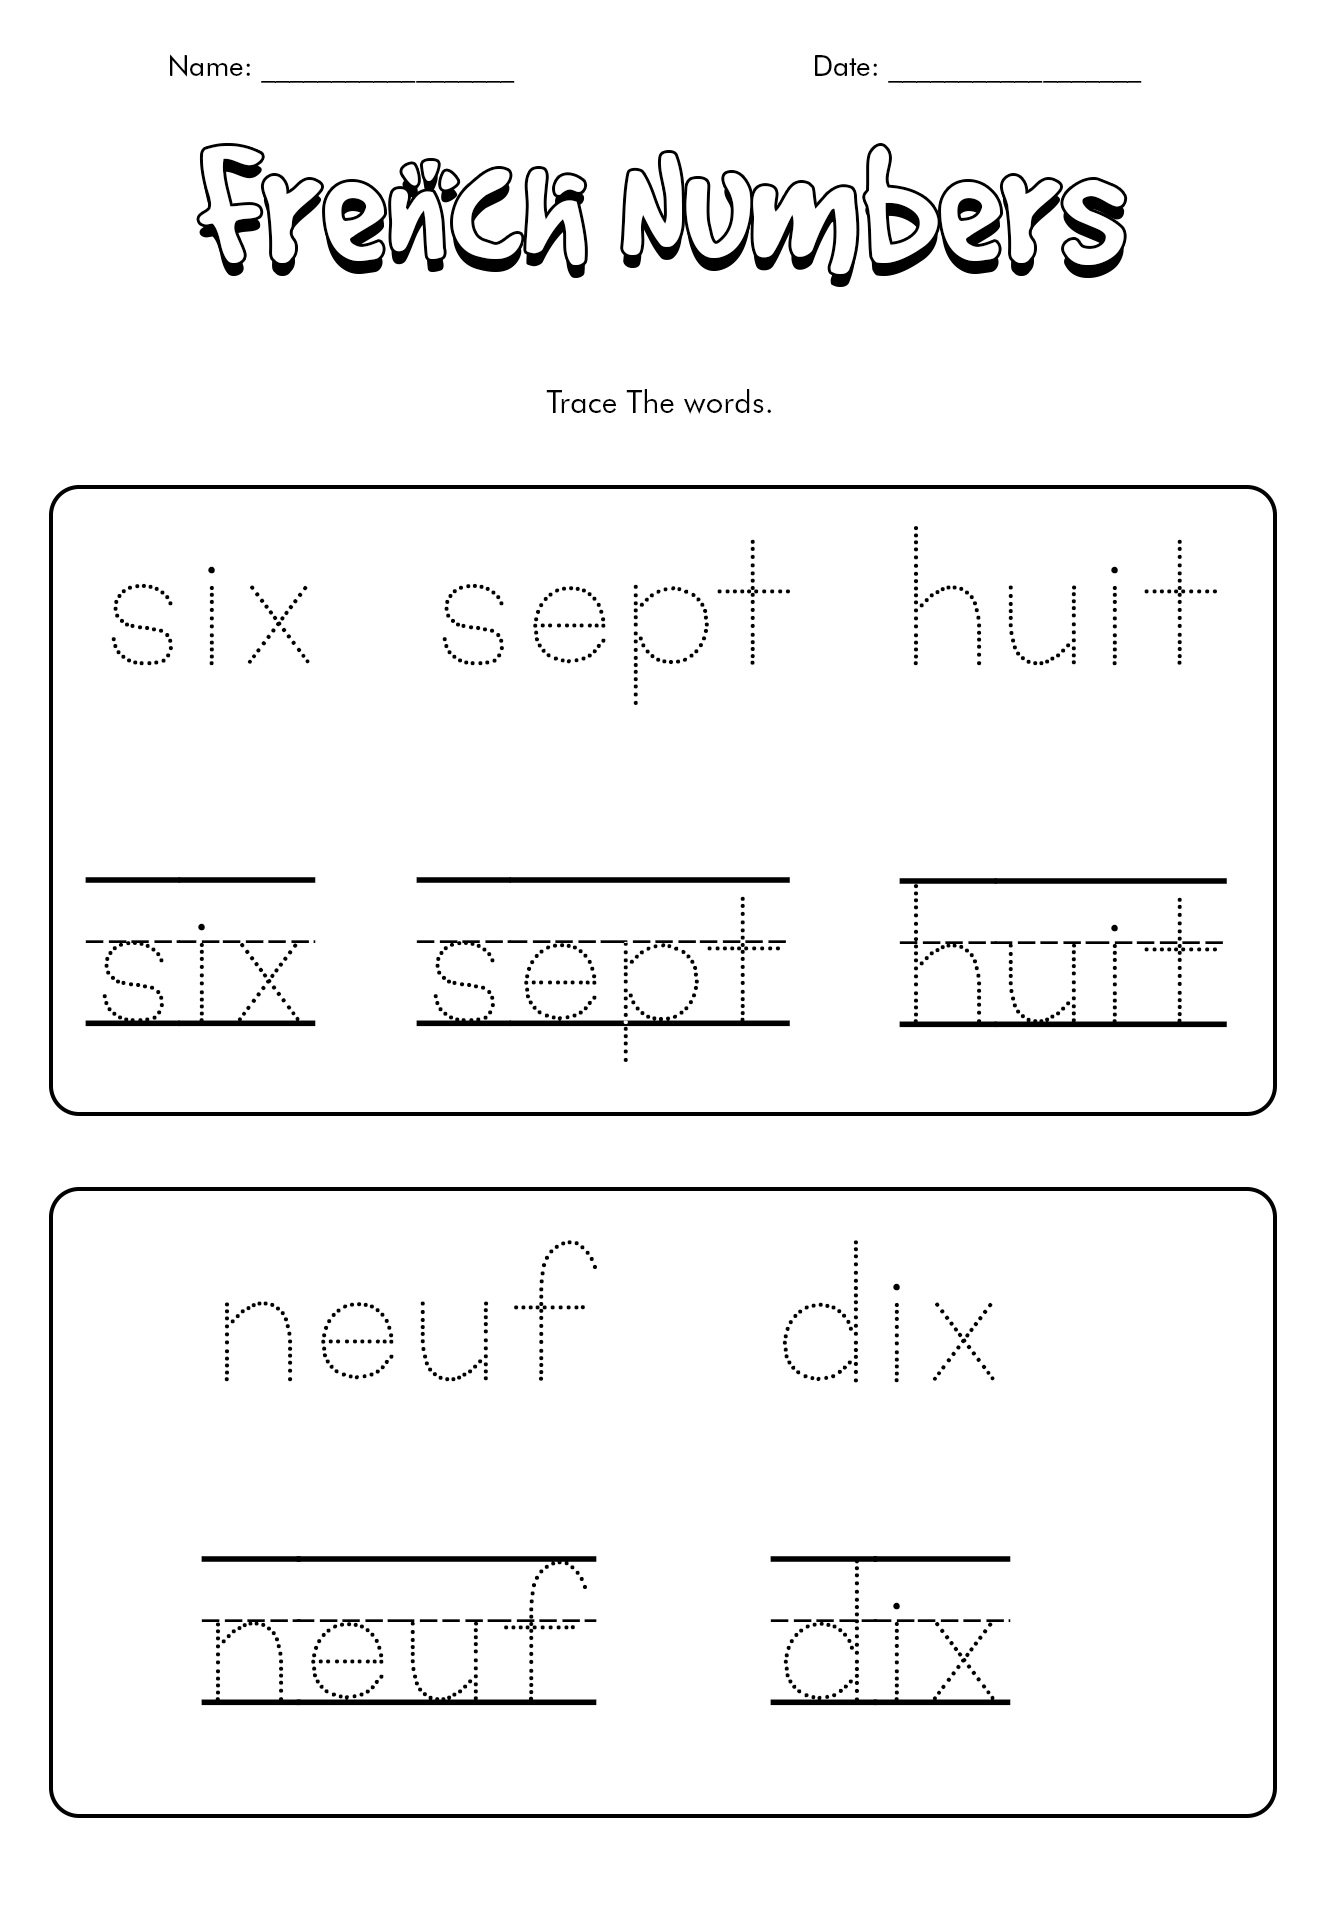 French Alphabet Worksheet For Distance Learning Made By Teachers French Greetings Worksheet